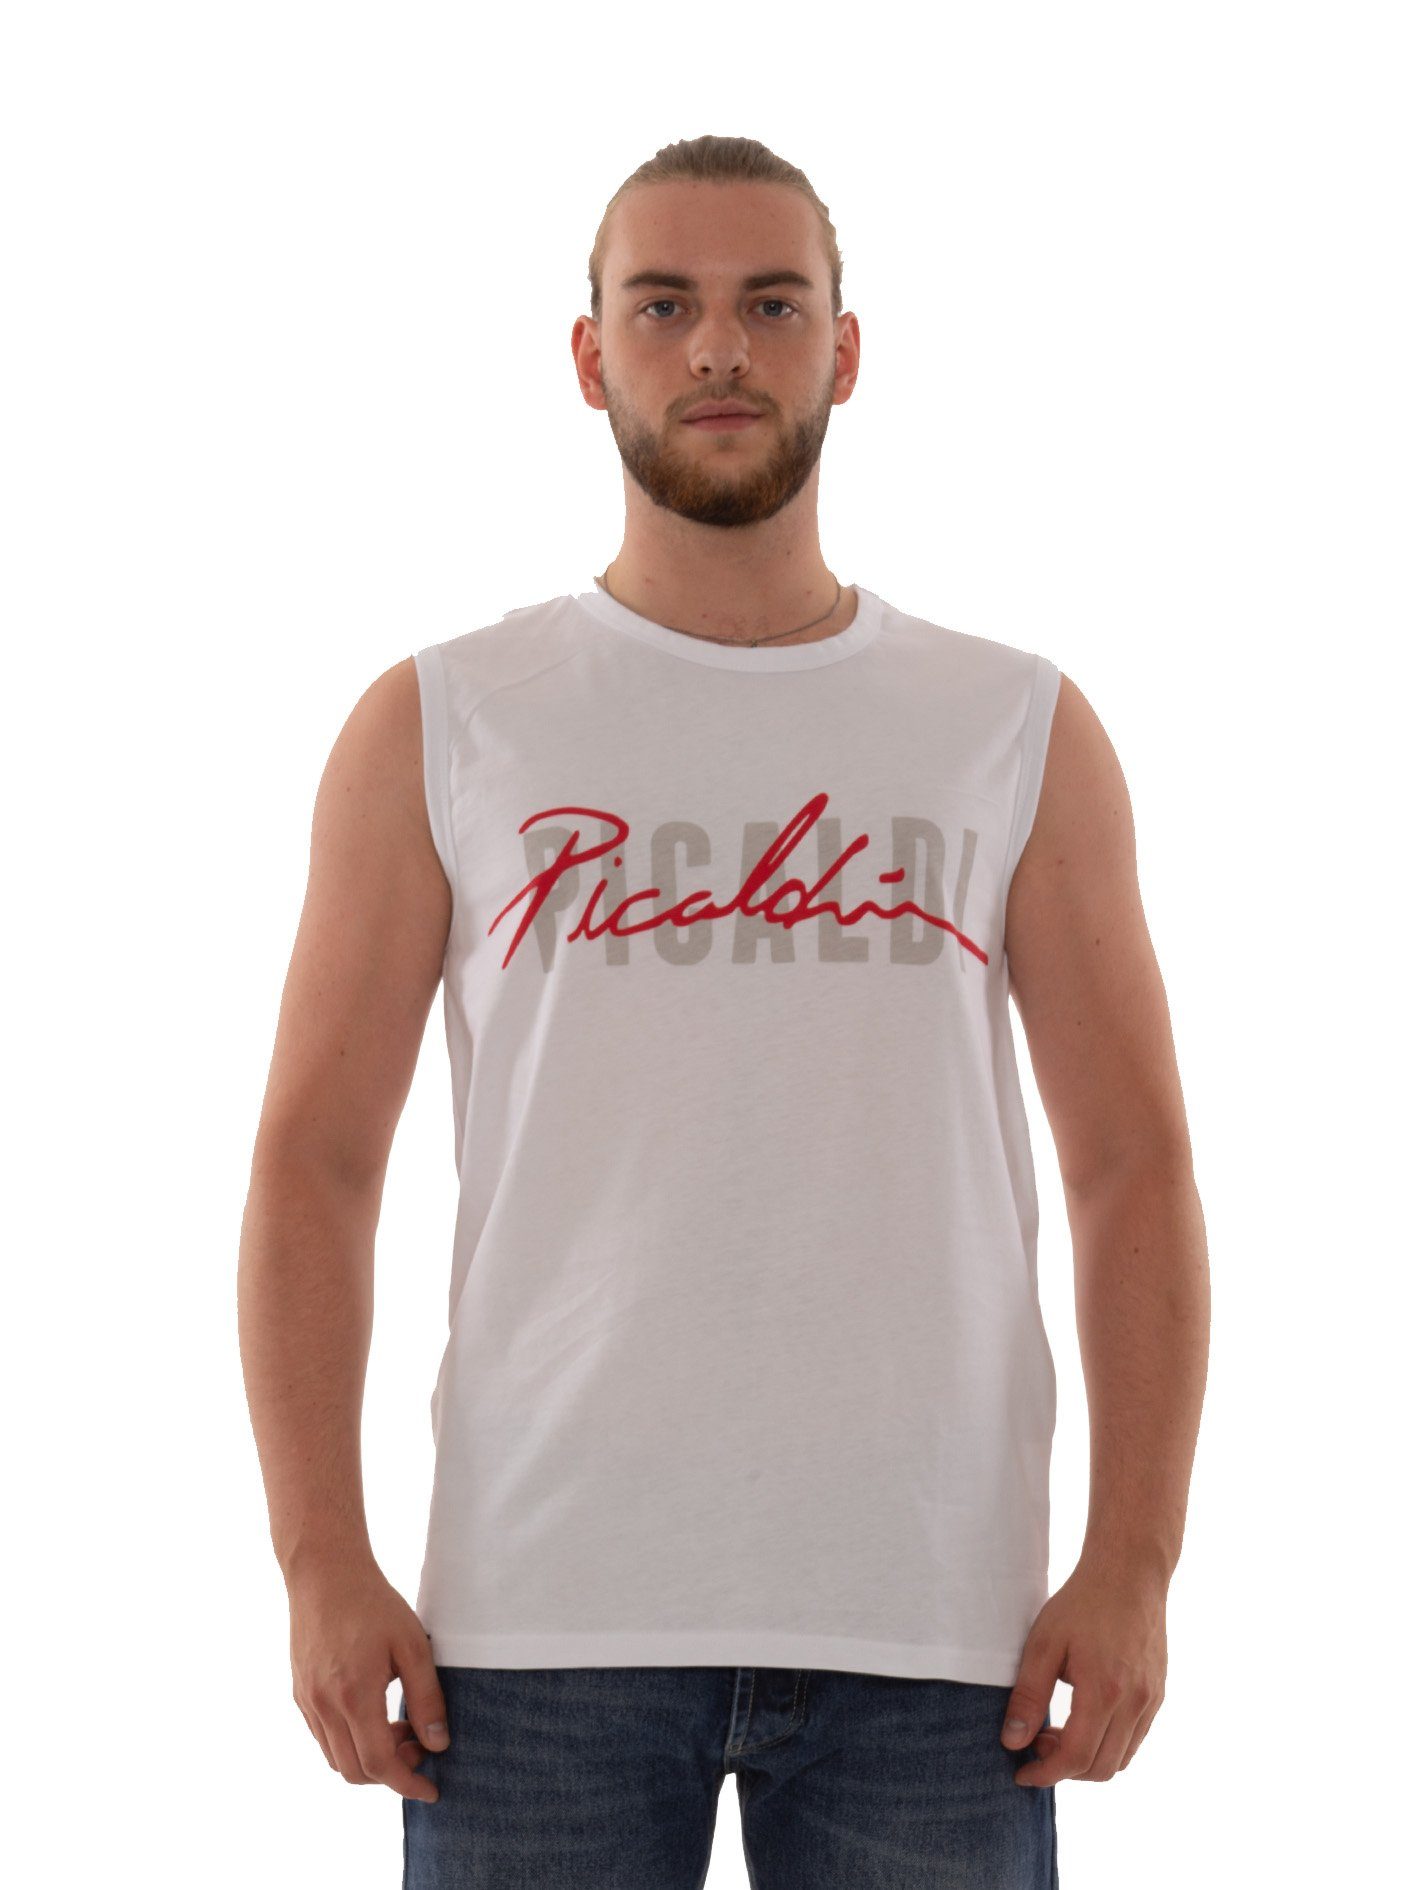 PICALDI Jeans Muskelshirt Collection Print, Rundhalsausschnit White